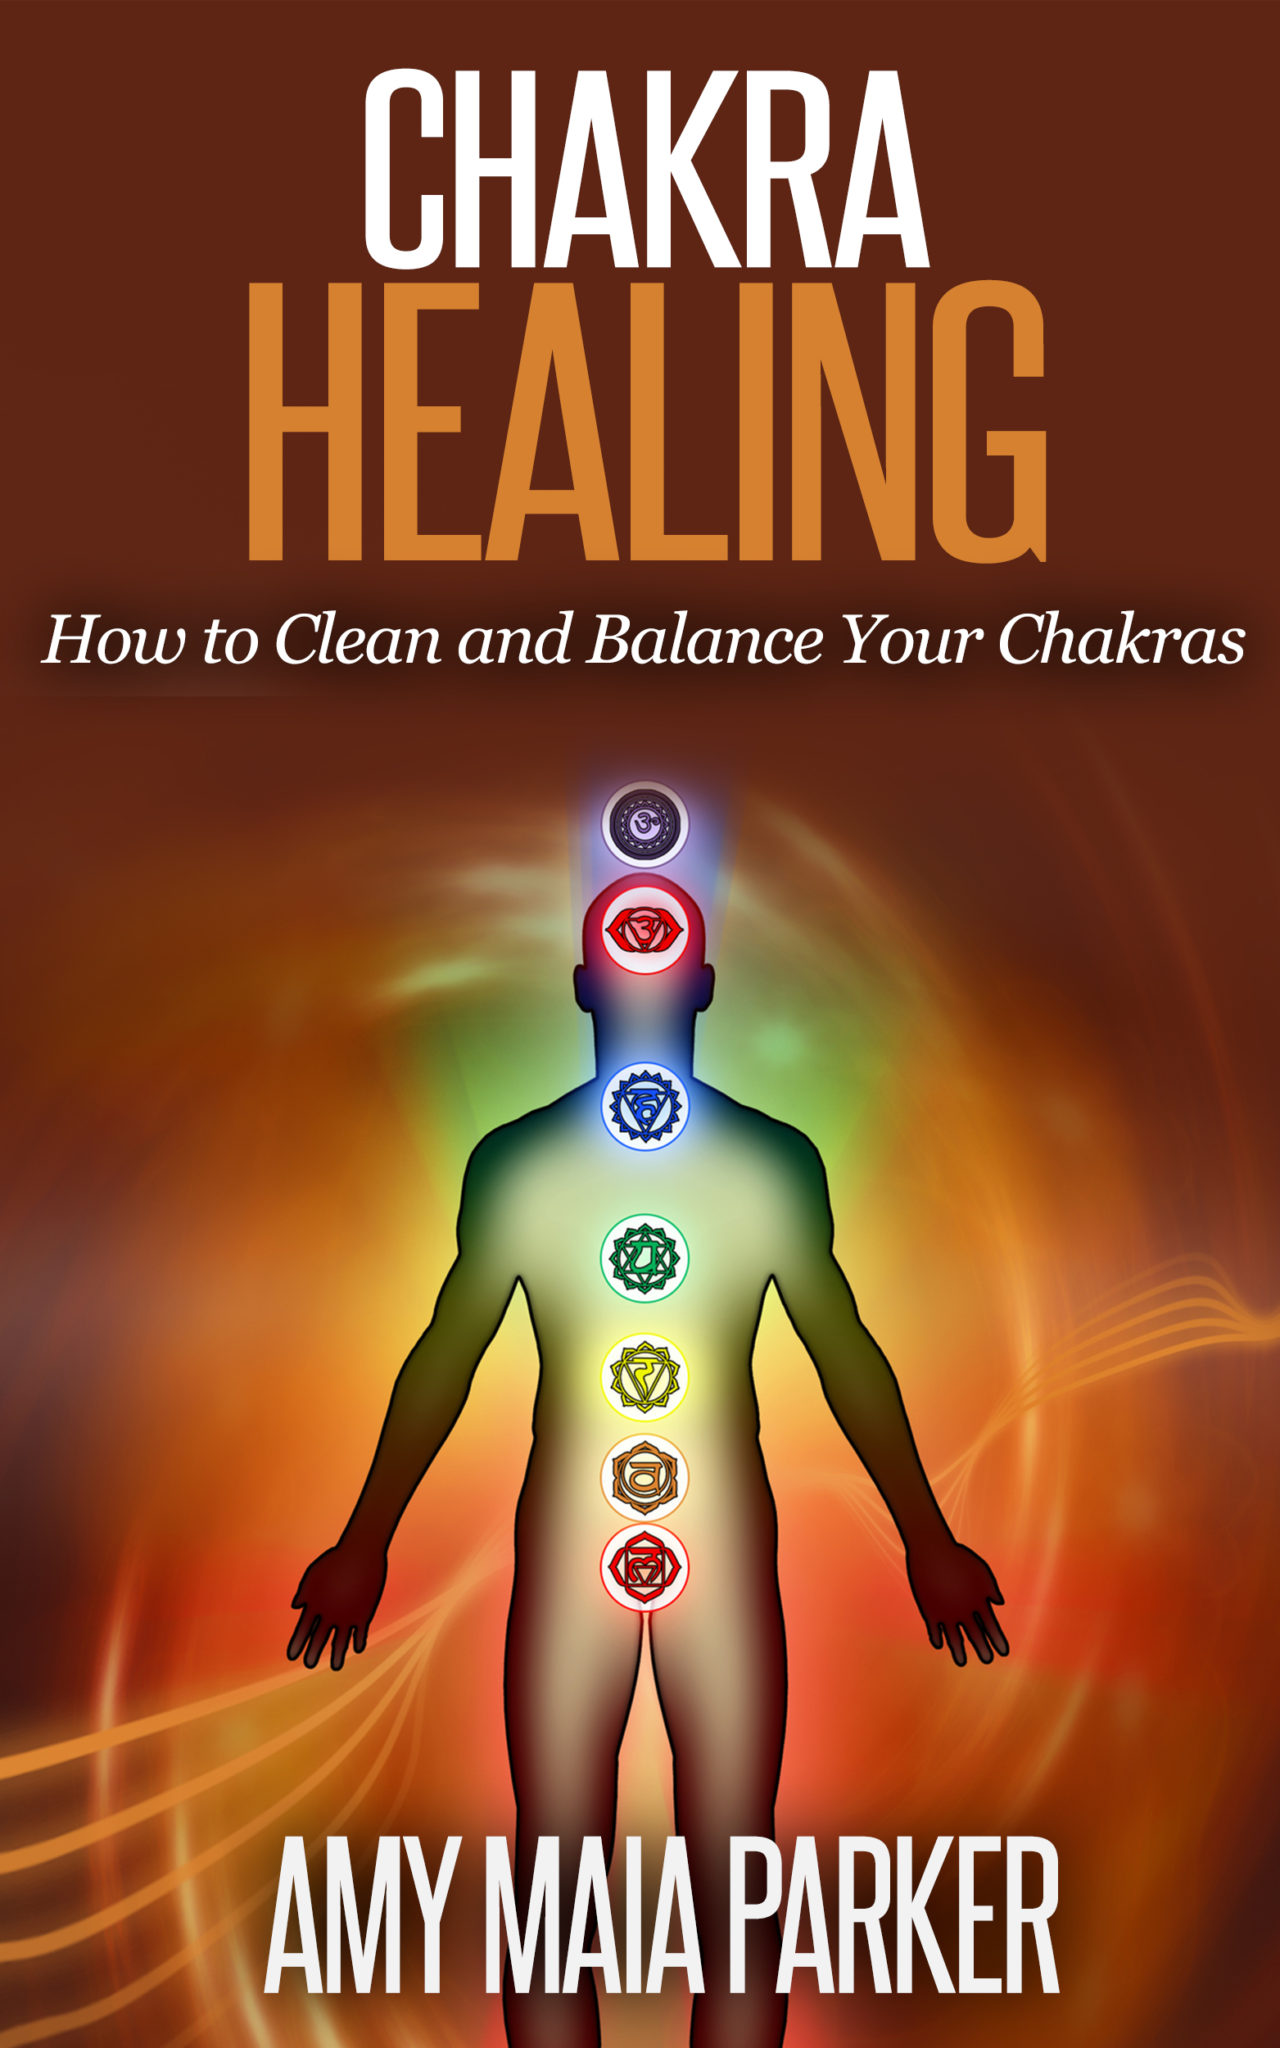 CHAKRA HEALING – How To Clean and Balance Your Chakras by Amy Maia Parker